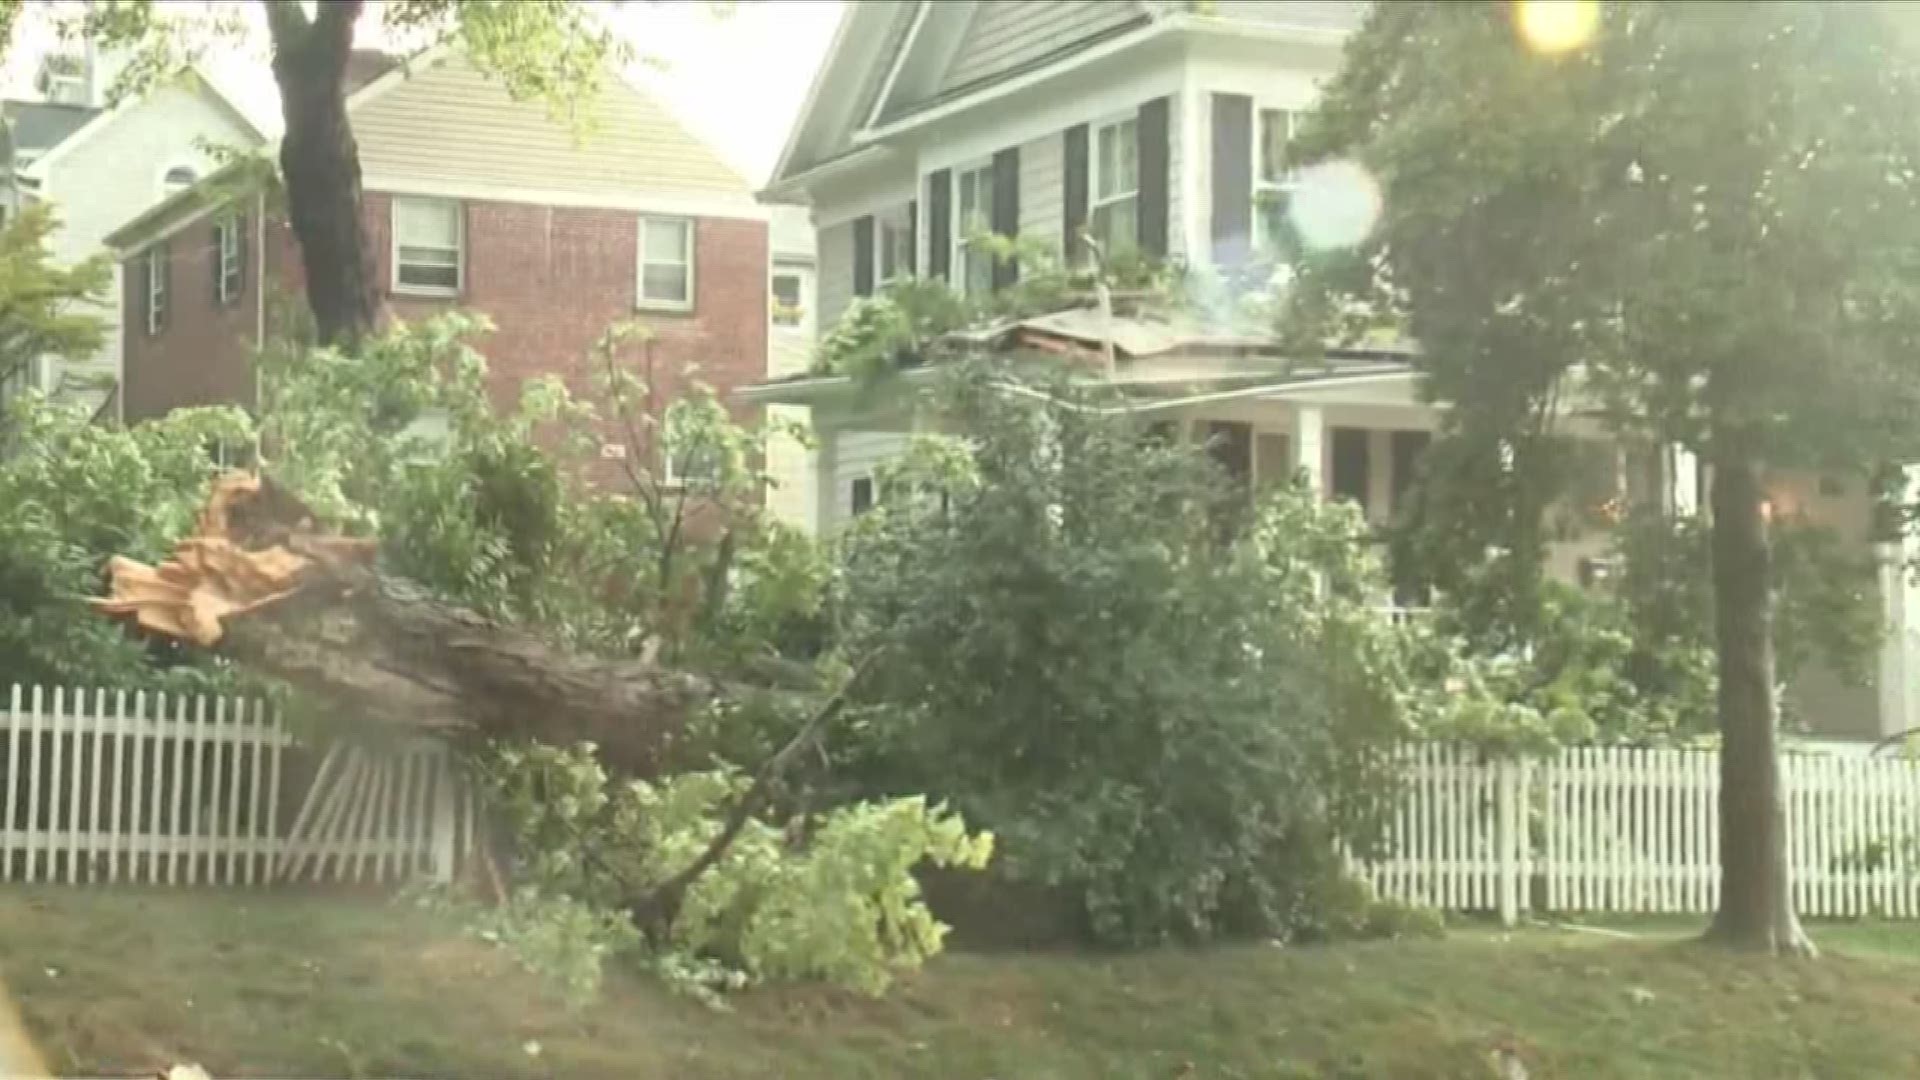 A tree fell onto a home in Bethesda during the severe weather on Aug. 20, 2019.